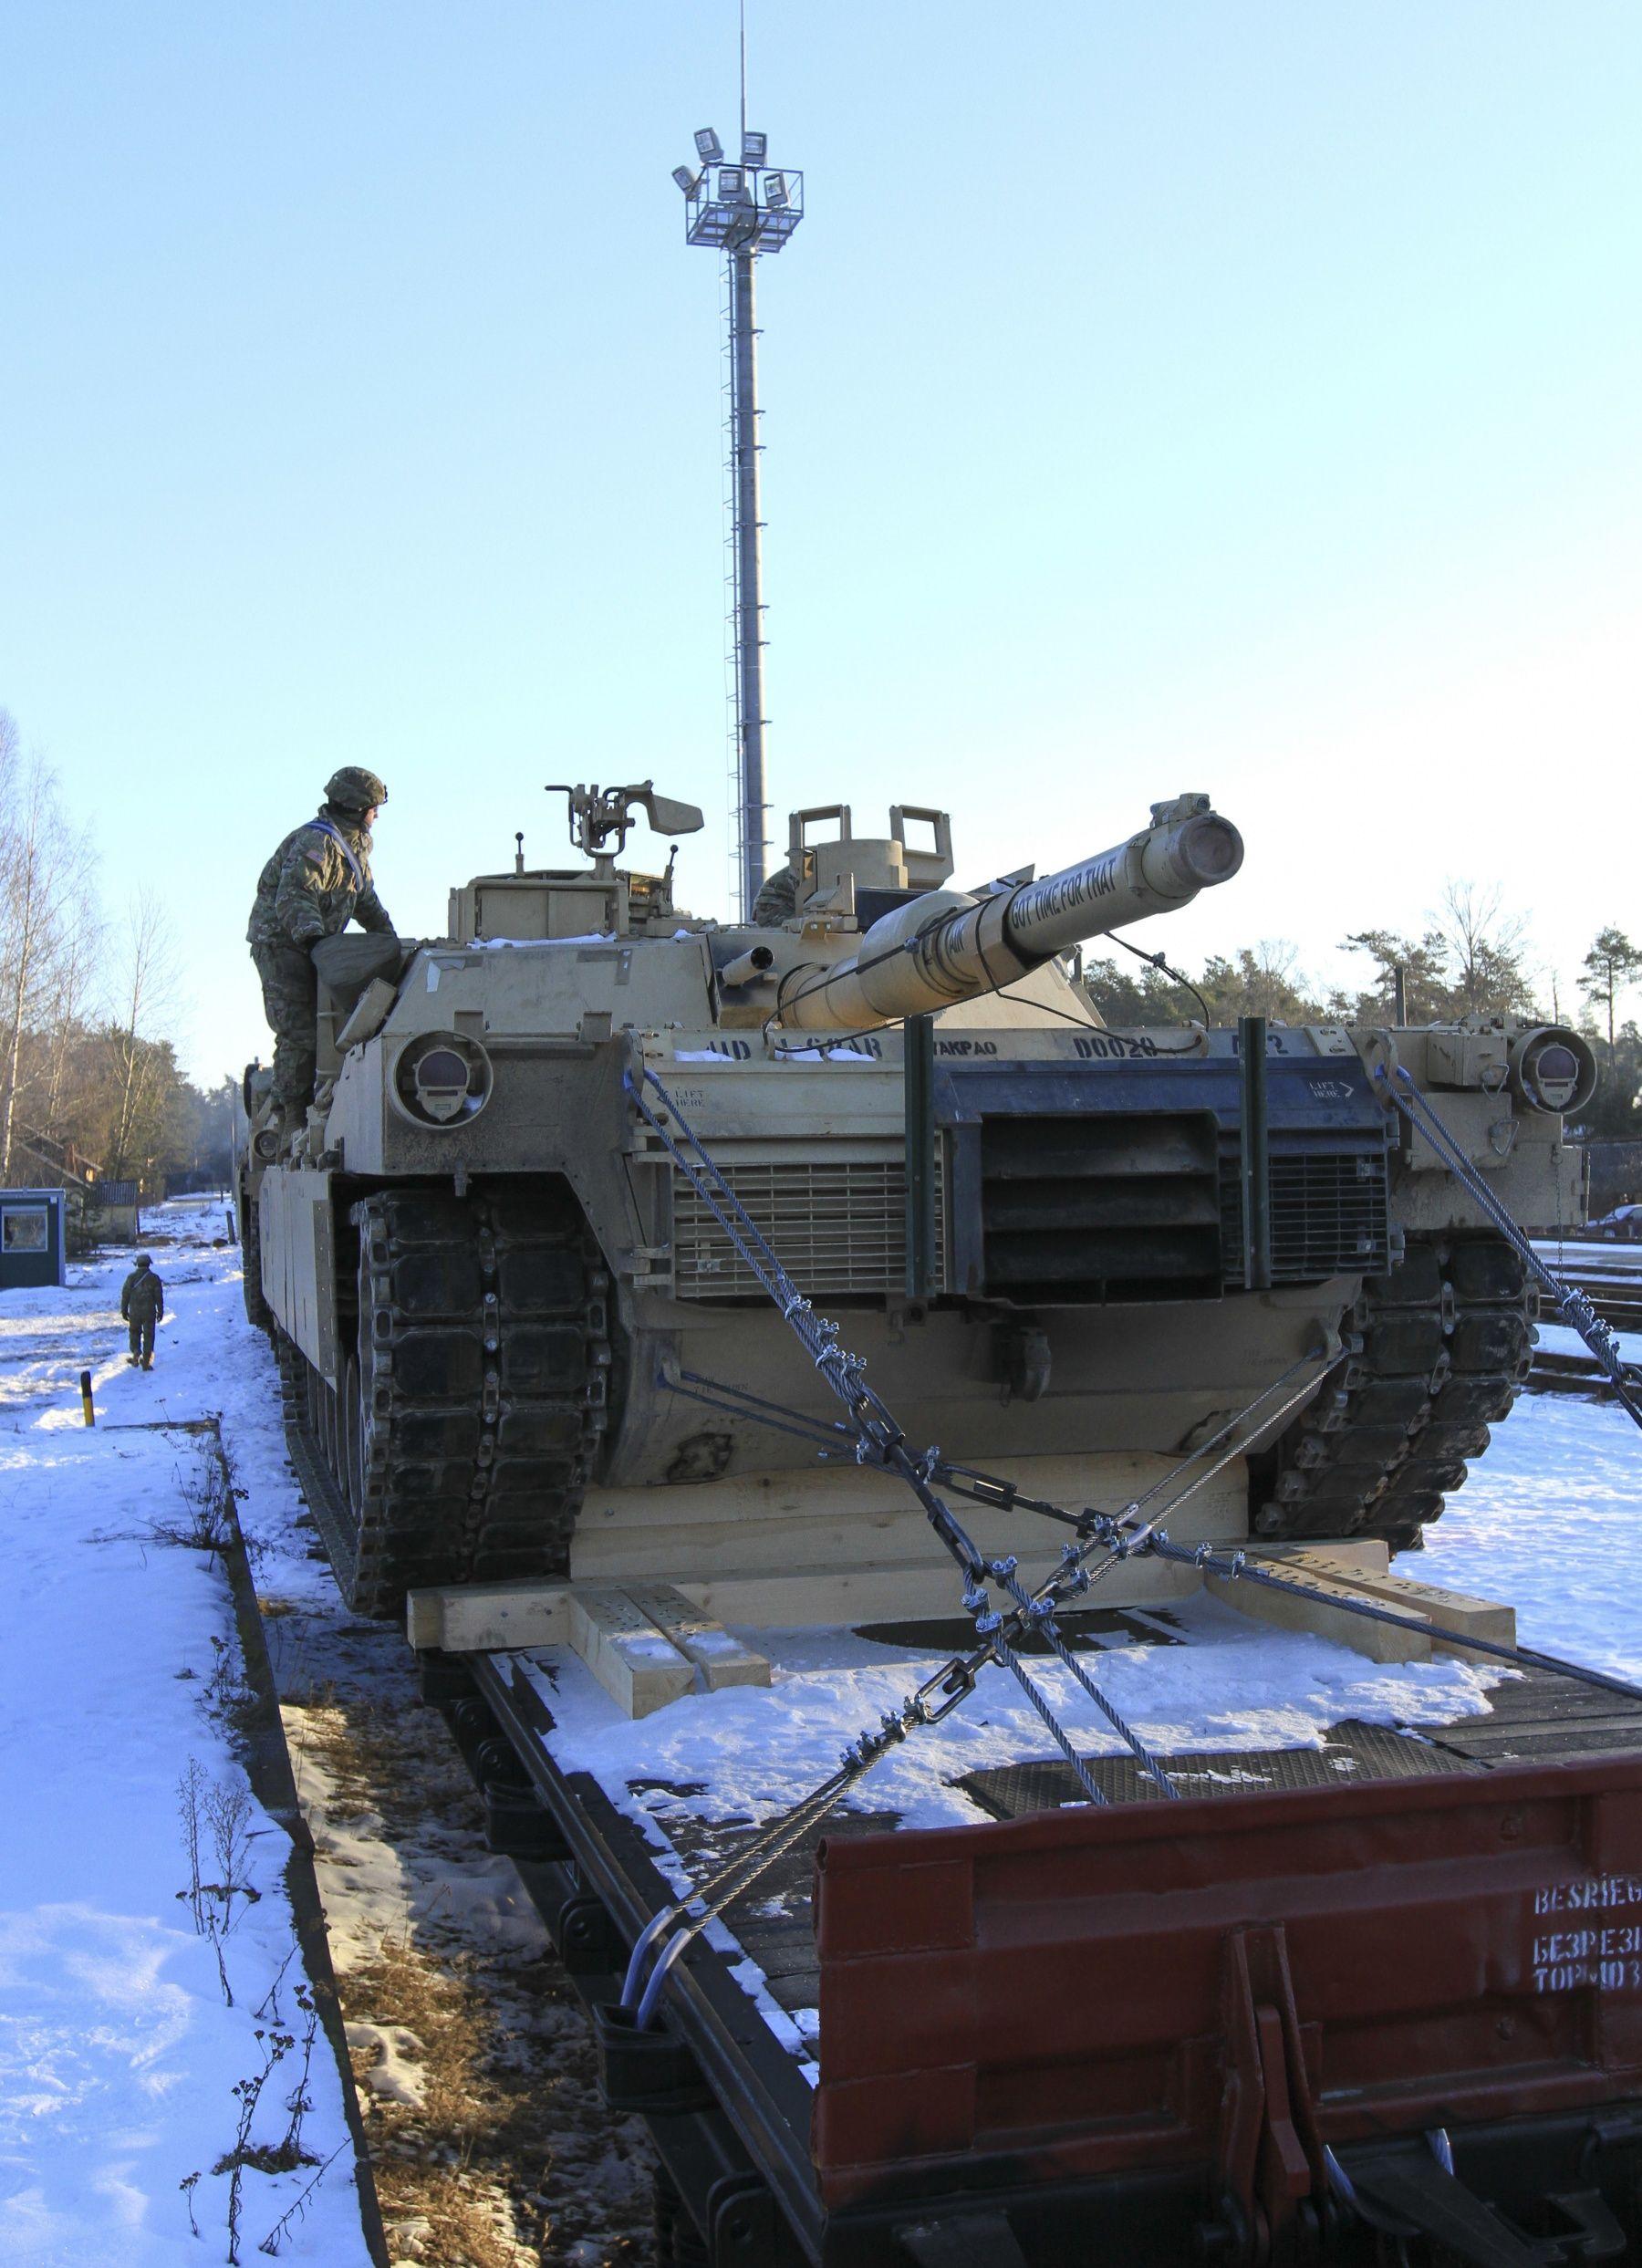 1-68 AR Silver Lion Logo - 1-68 AR tracks on ground in Latvia | Article | The United States Army